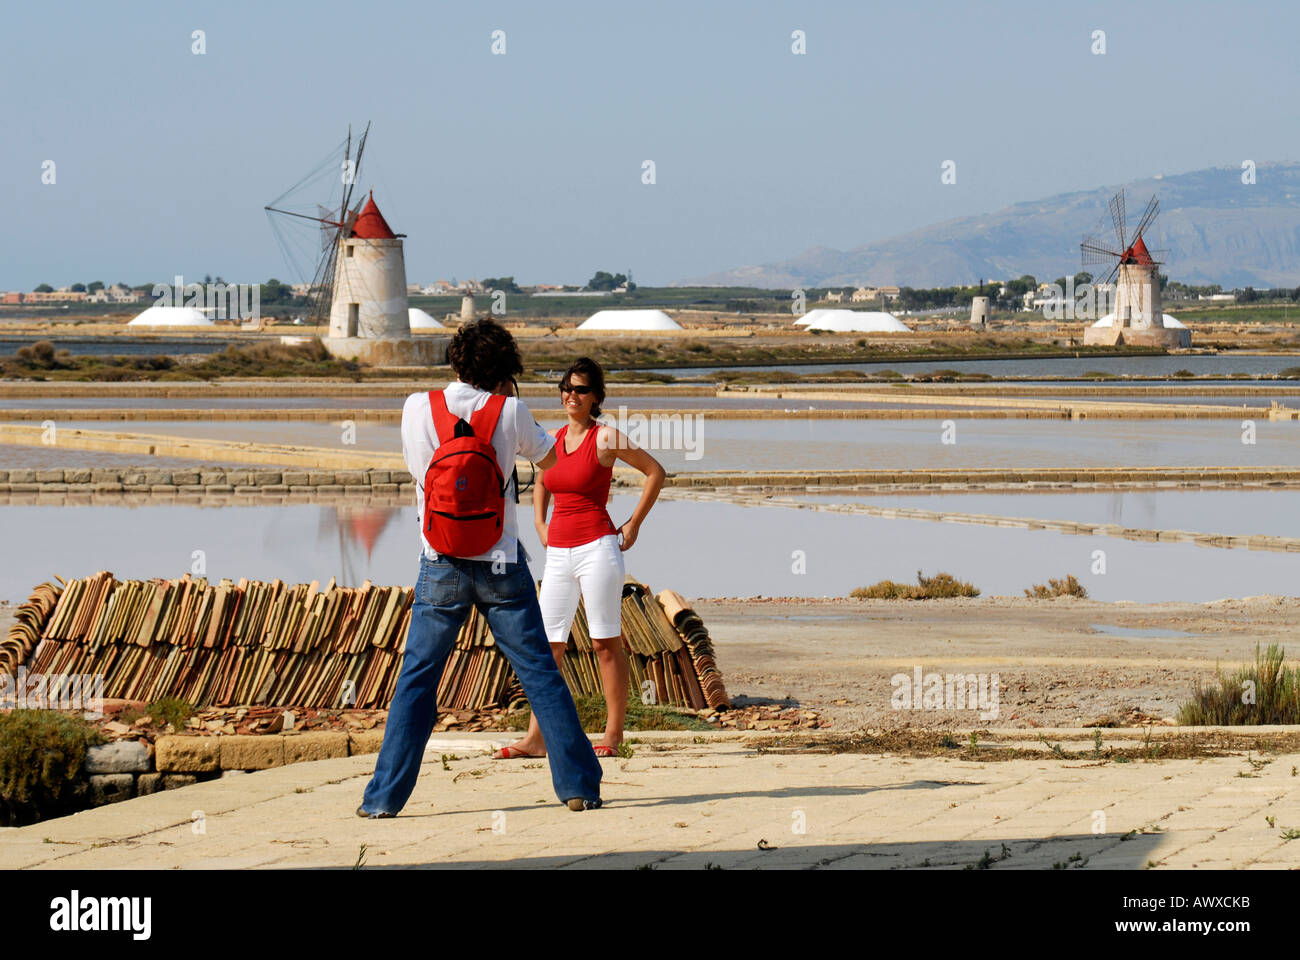 A couple taking a tourist picture among saline fields and windmills Mozia Island Sicily Italy Stock Photo